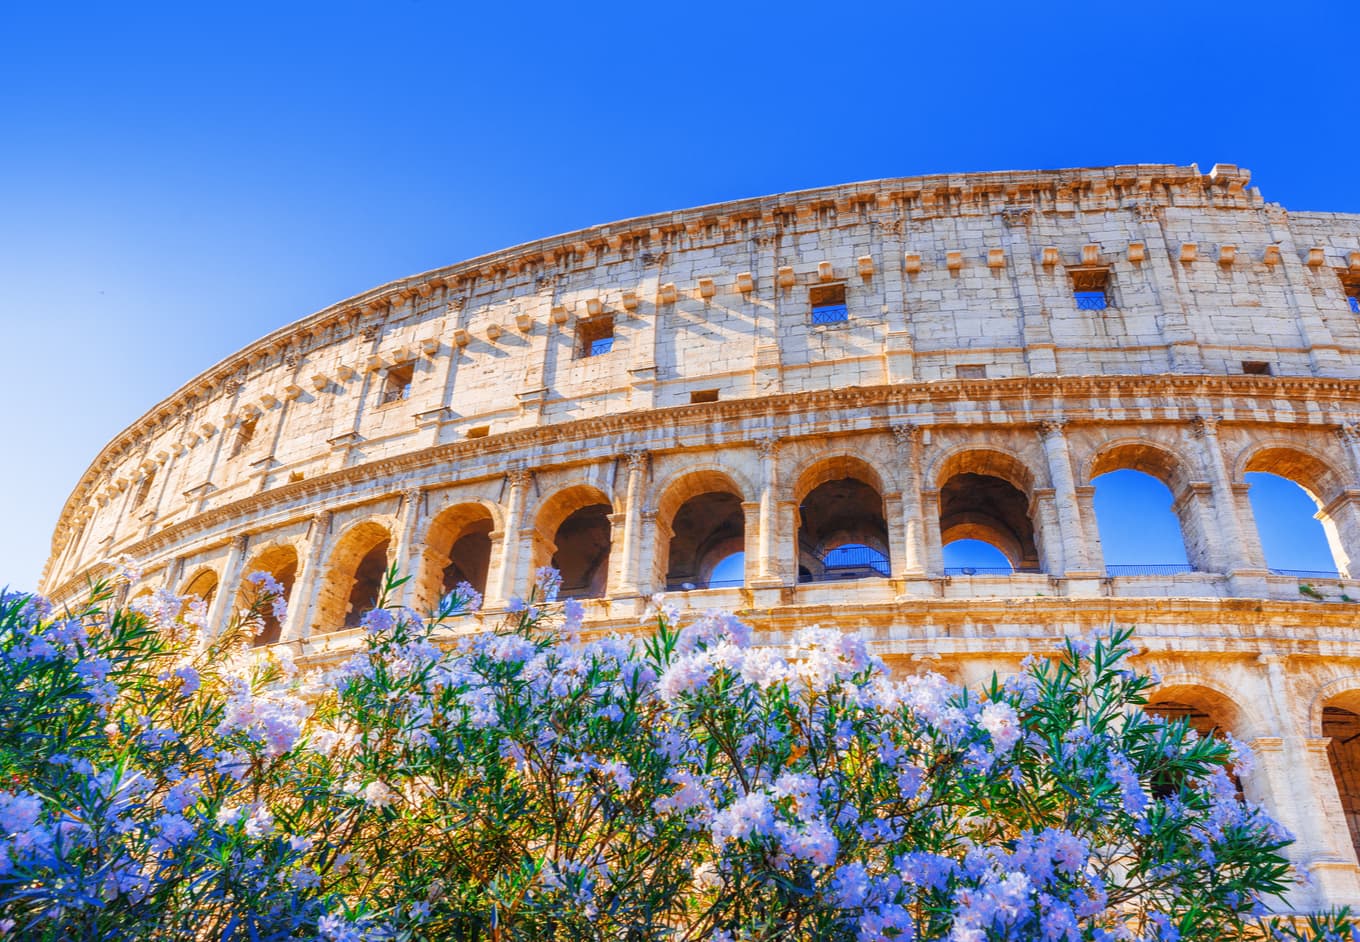 best time to visit rome